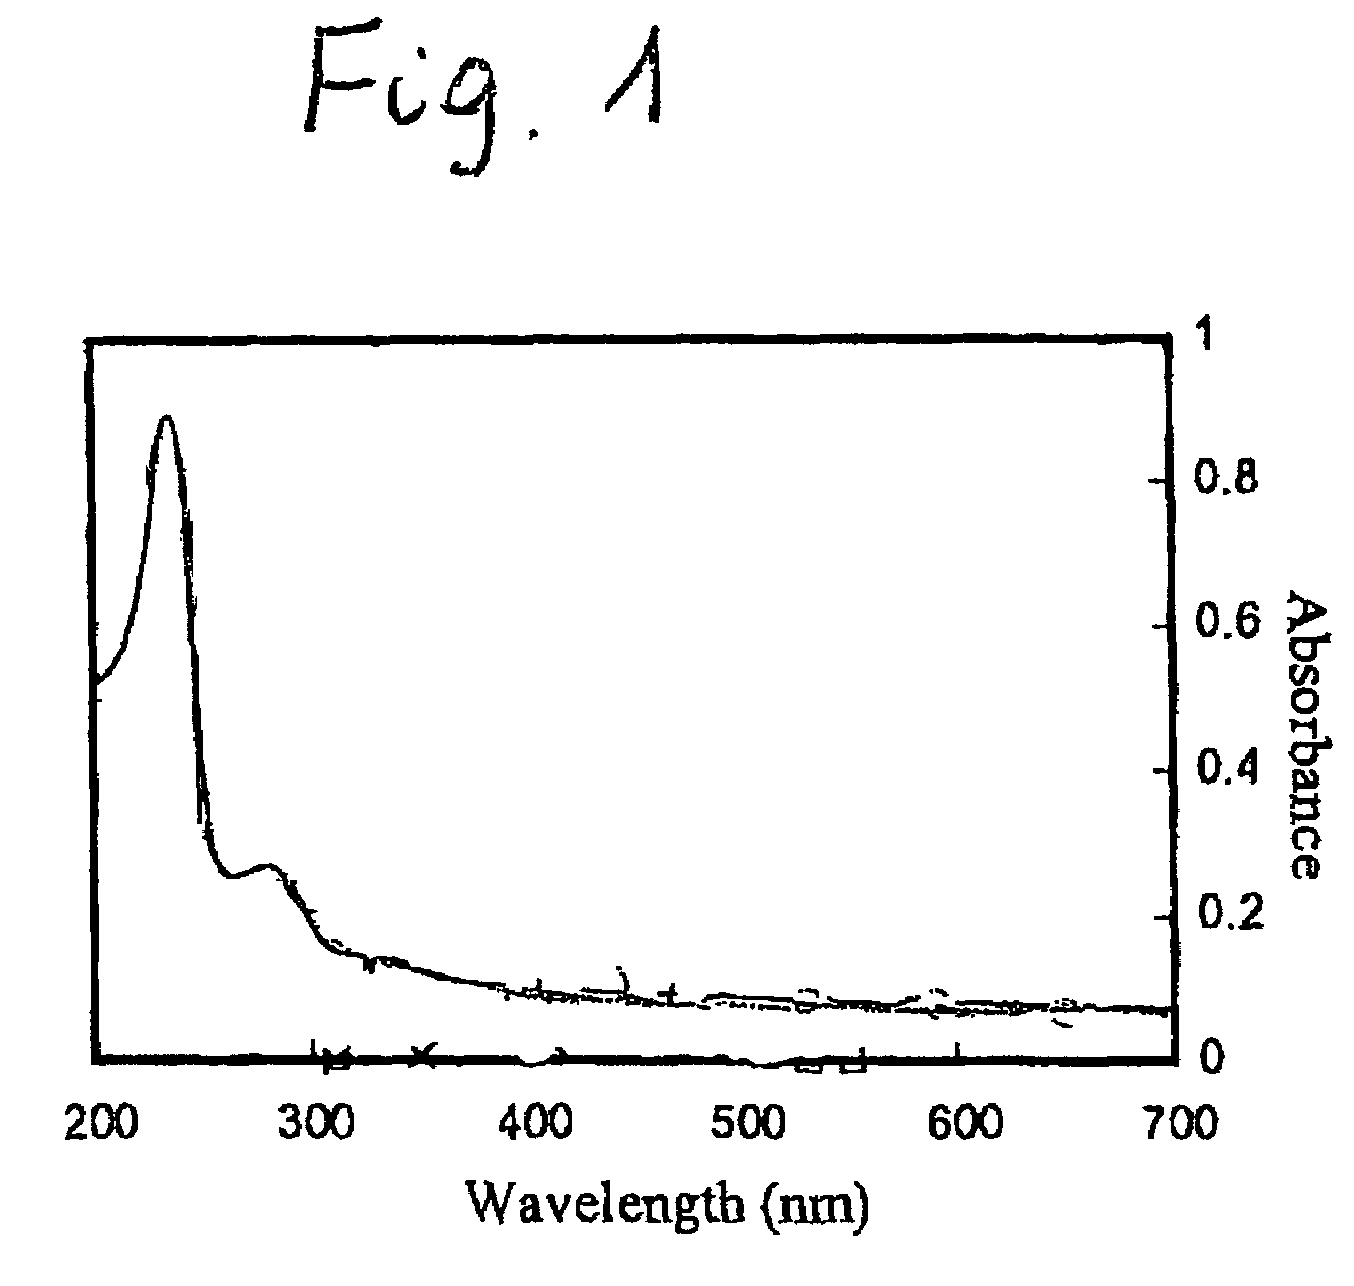 Water soluble biodegradable polymeric photocatalysts